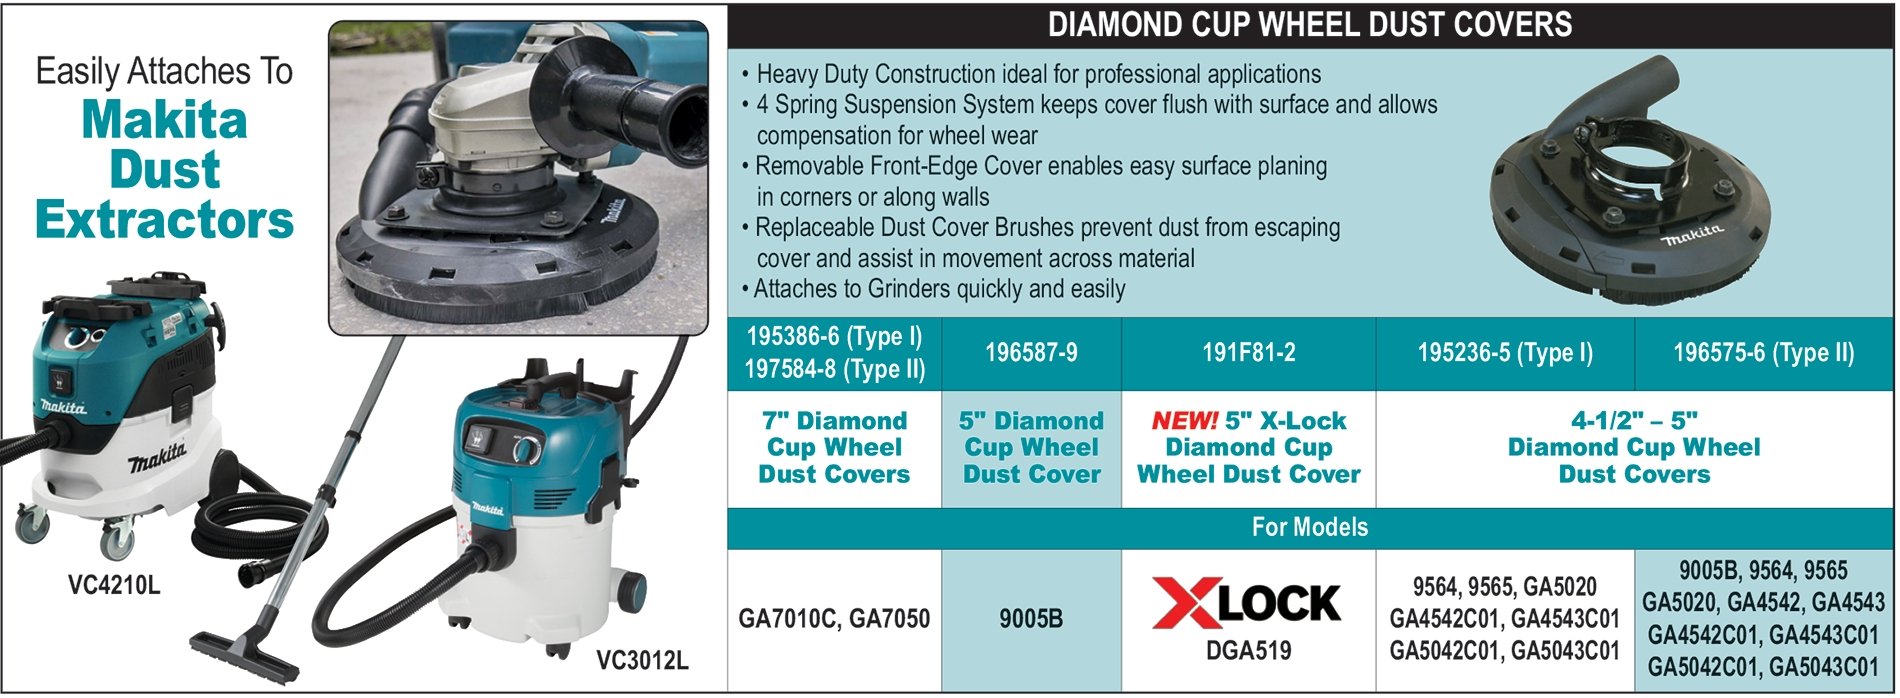 7" Dust Cover Set for Diamond Cup Wheels Makita